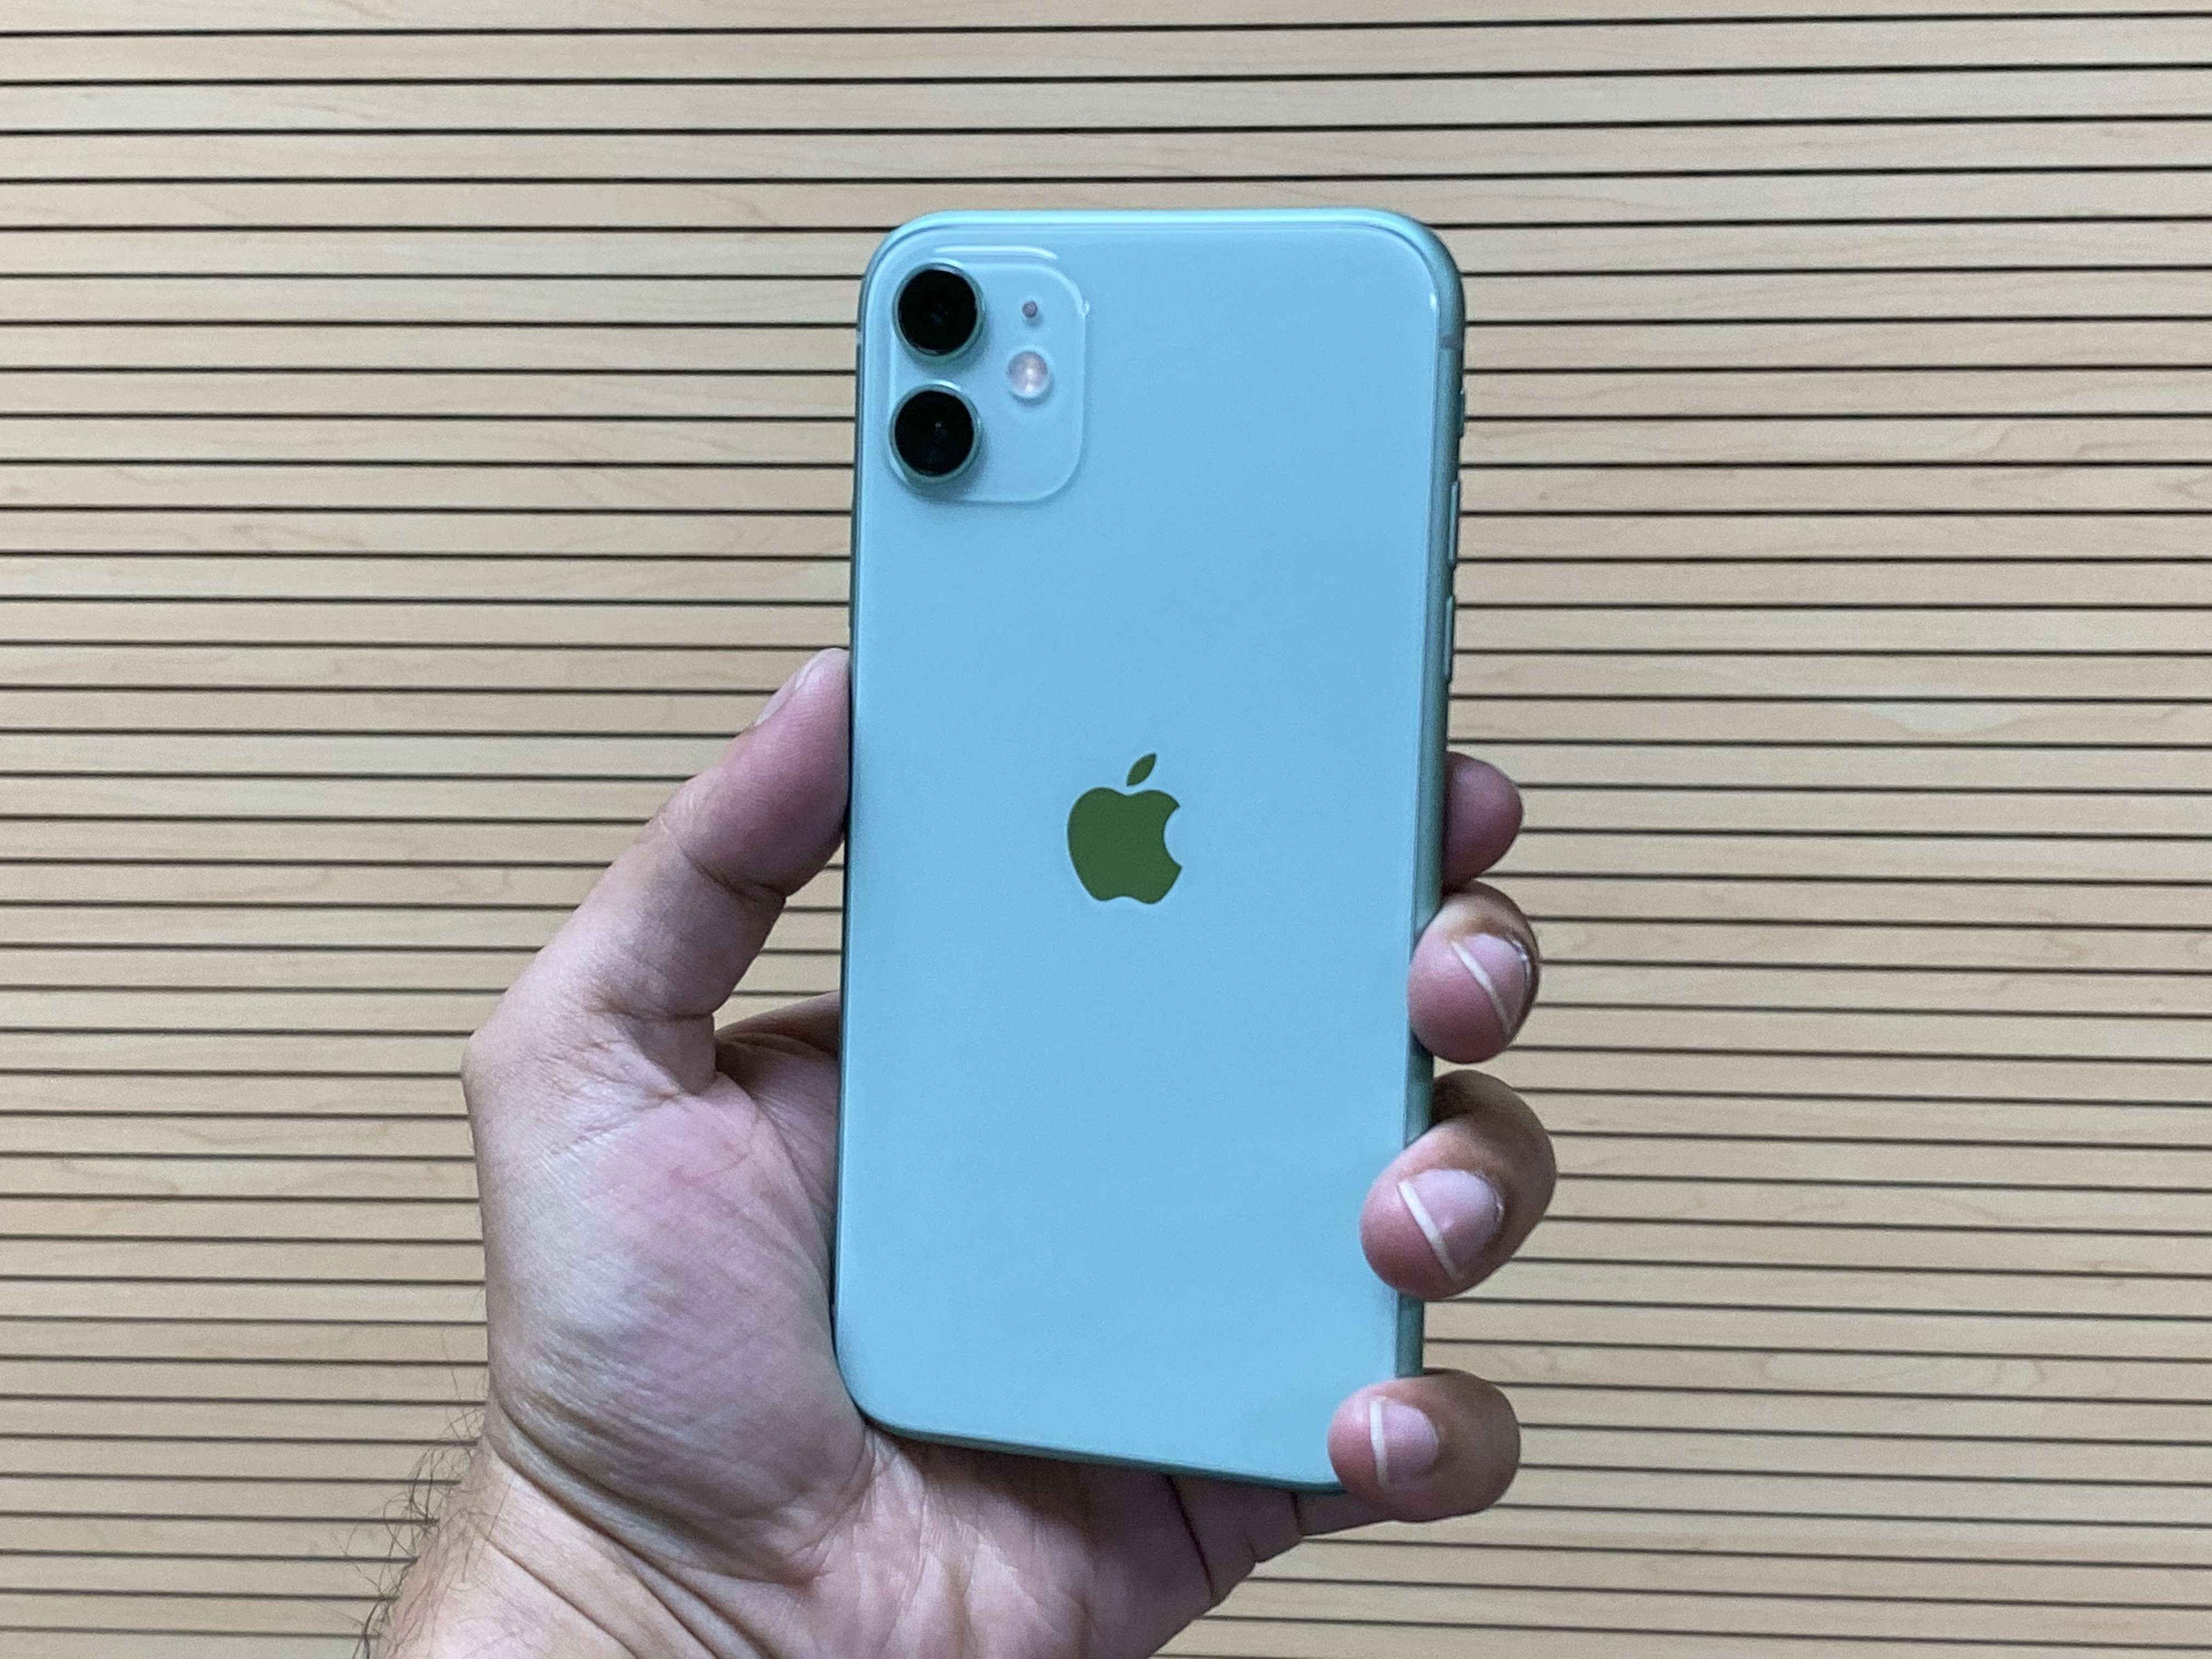 Apple starts manufacturing of iPhone 11 in Chennai Foxconn plant